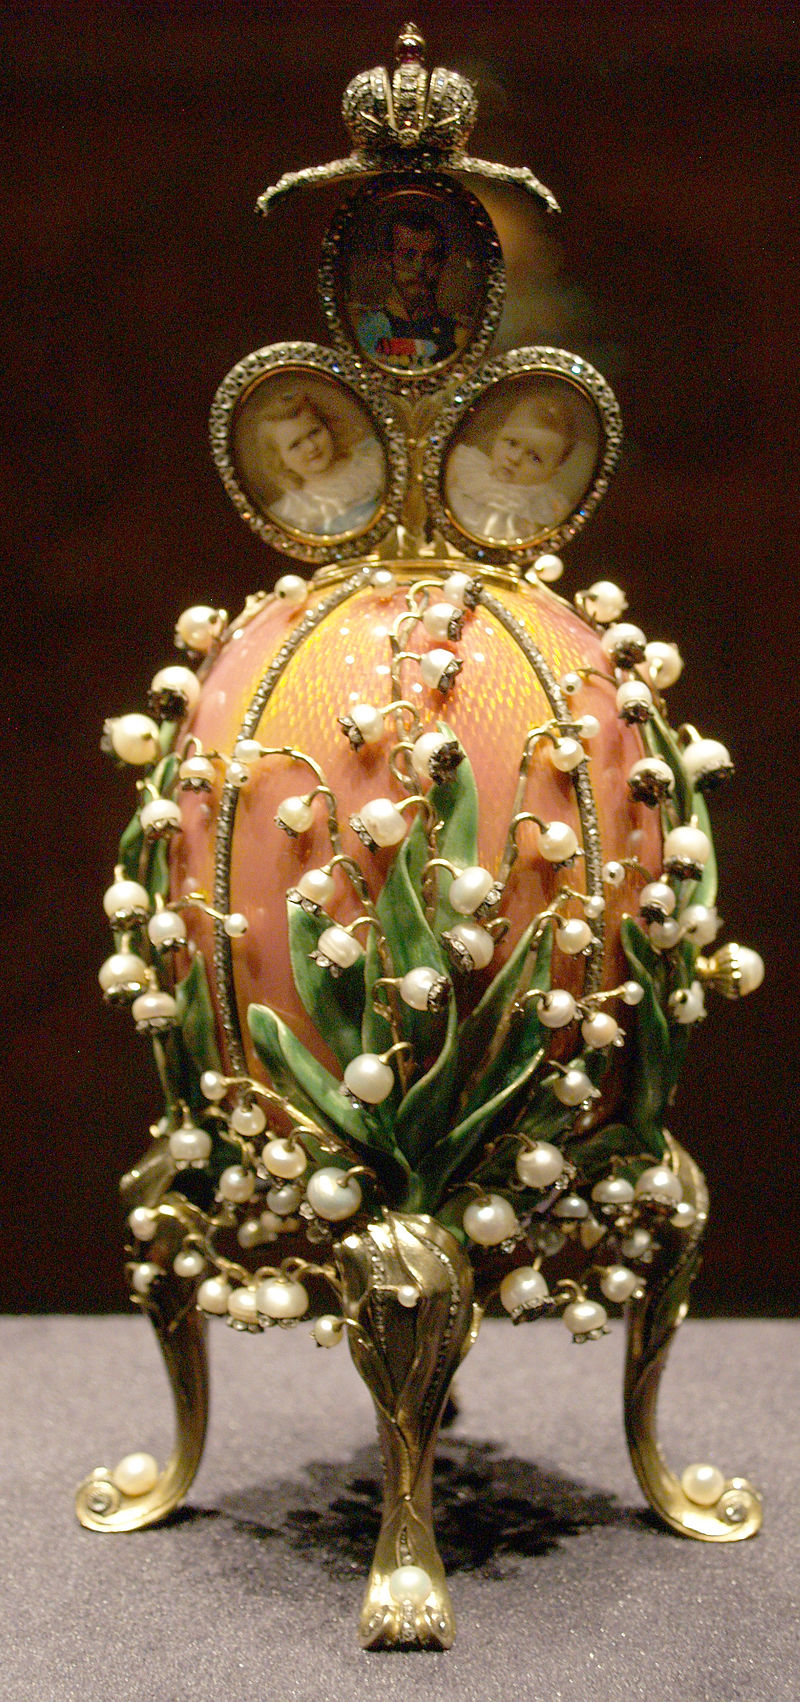 Faberge Egg Lilly of the Valley. Image by Miguel Hermoso Cuesta. CC by SA